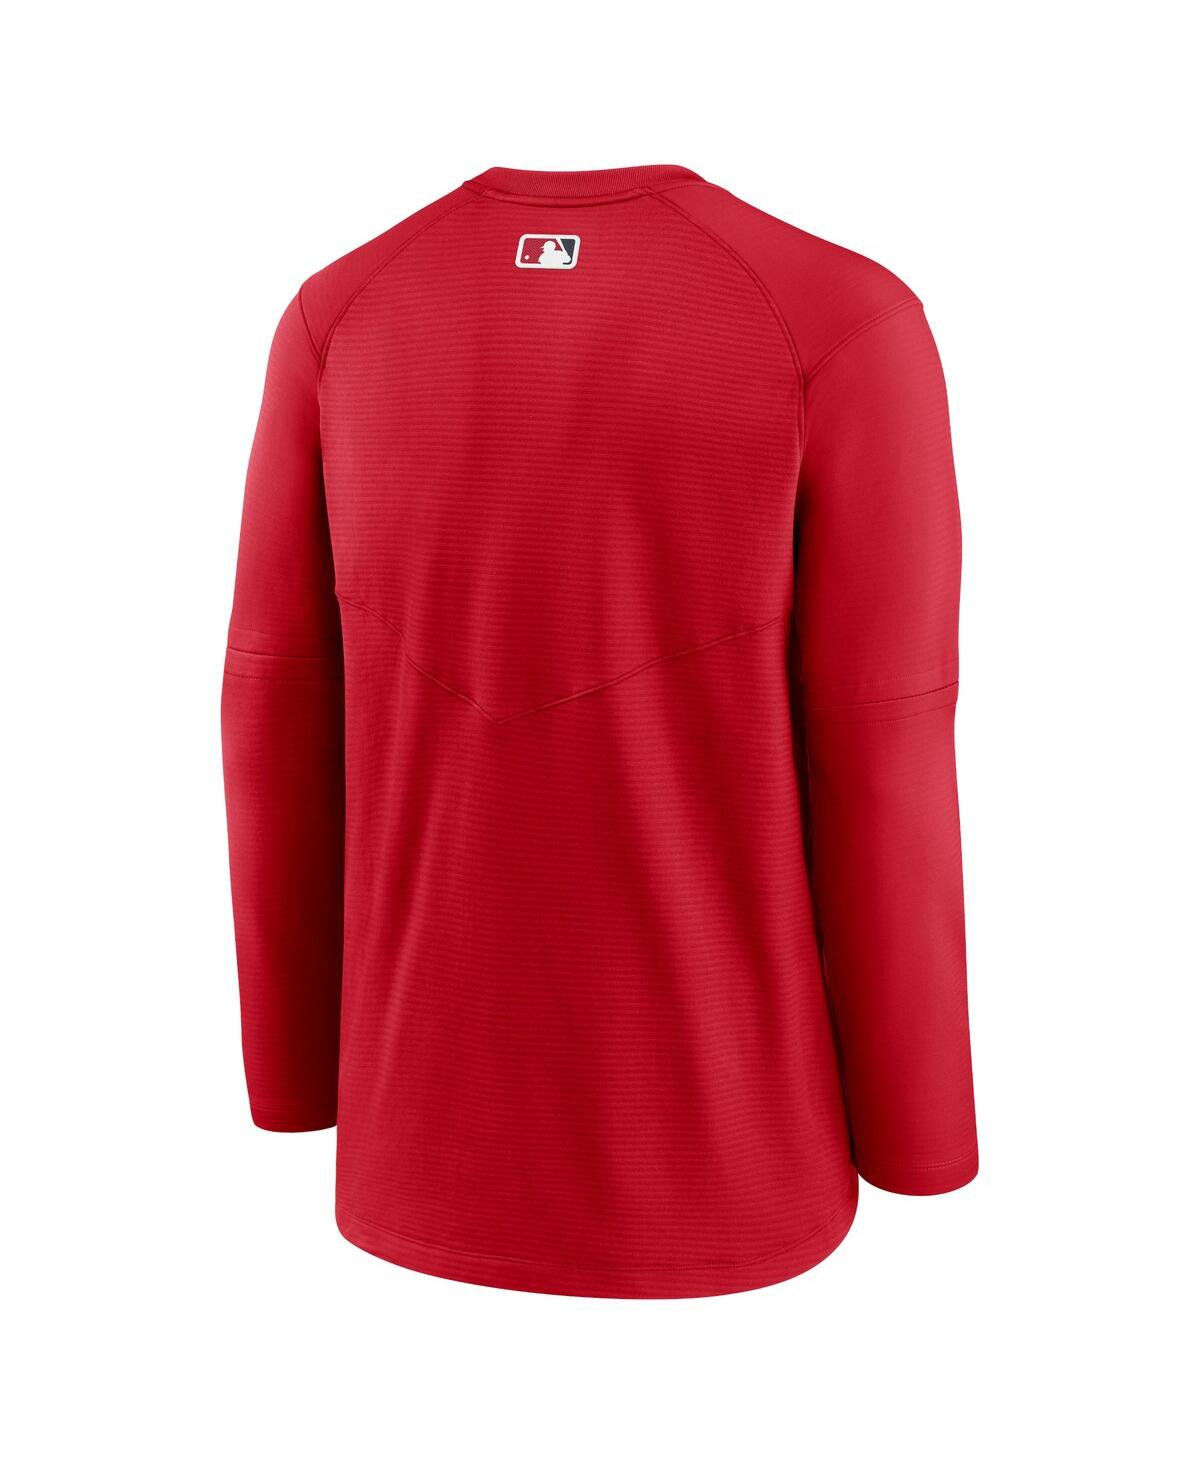 Shop Nike Men's  Red Washington Nationals Authentic Collection Logo Performance Long Sleeve T-shirt